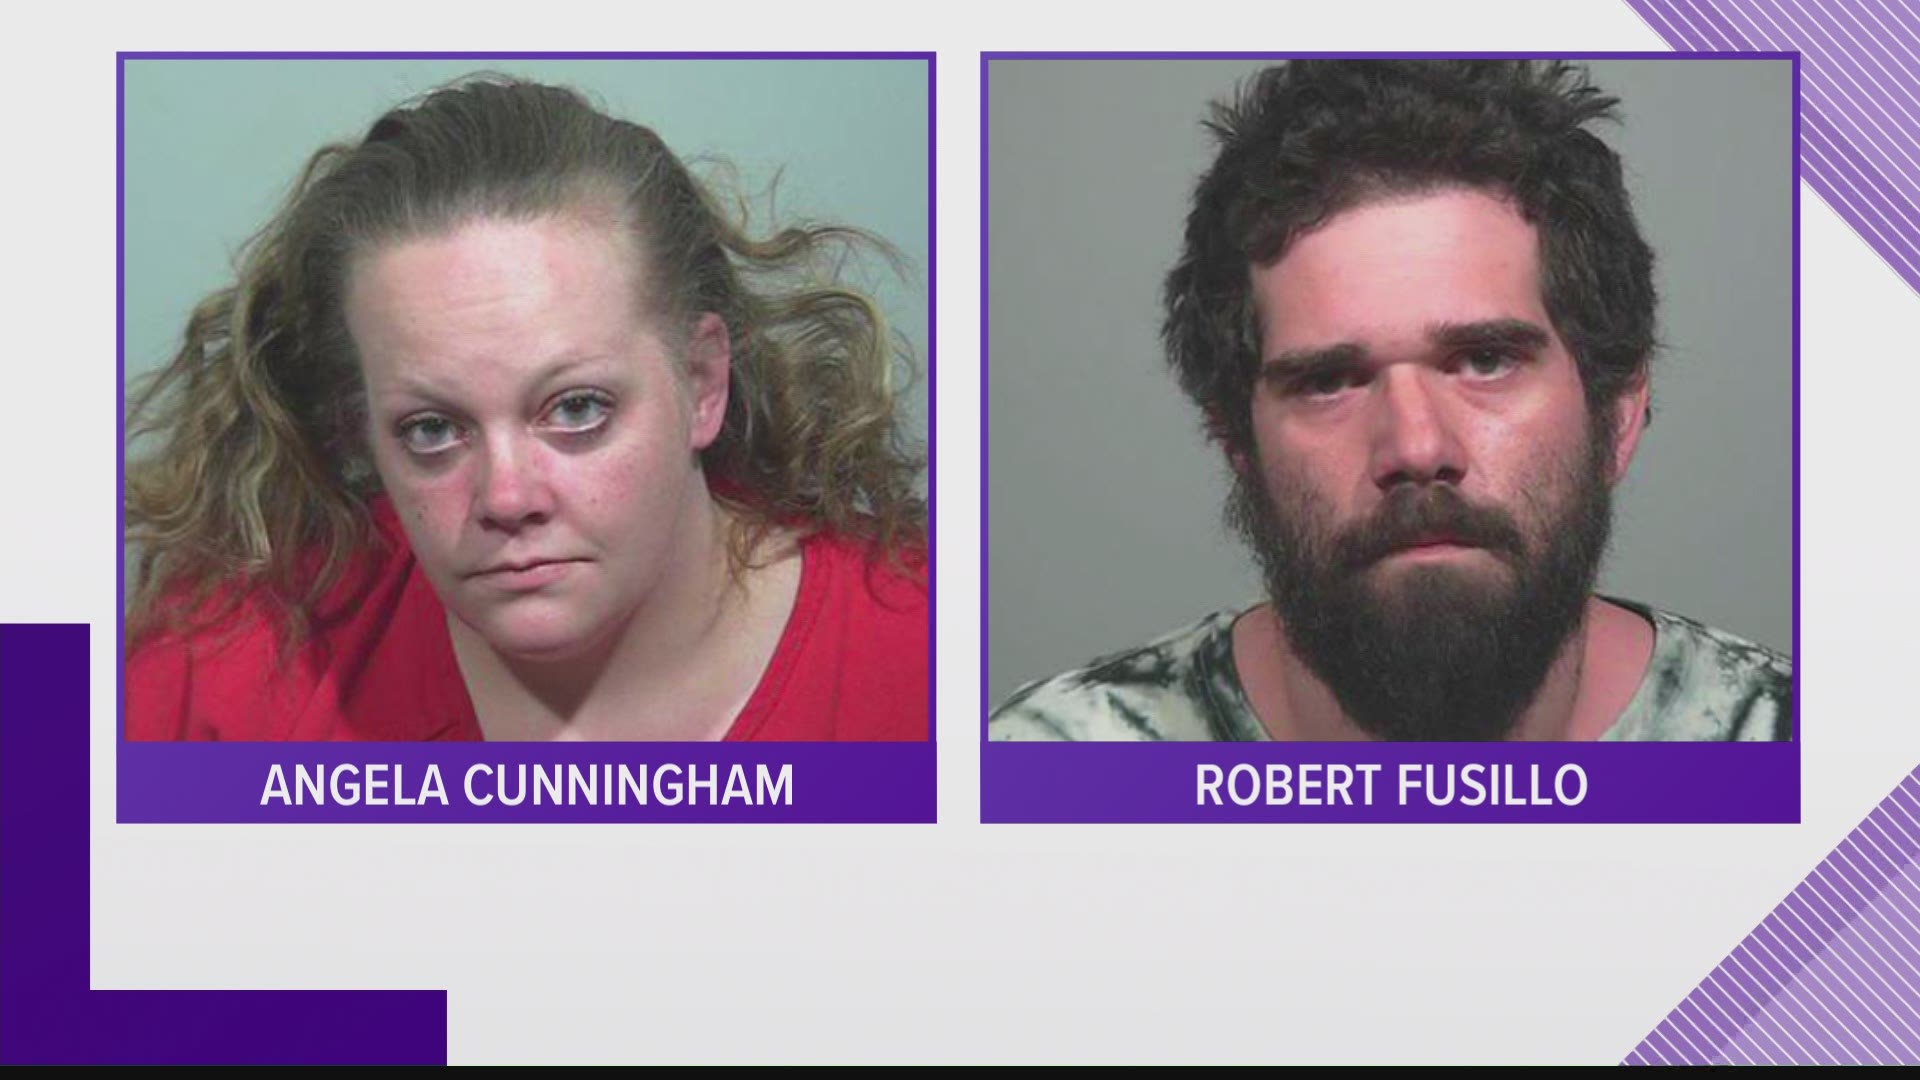 Two people were arrested for allegedly stealing mail from mailboxes around the state